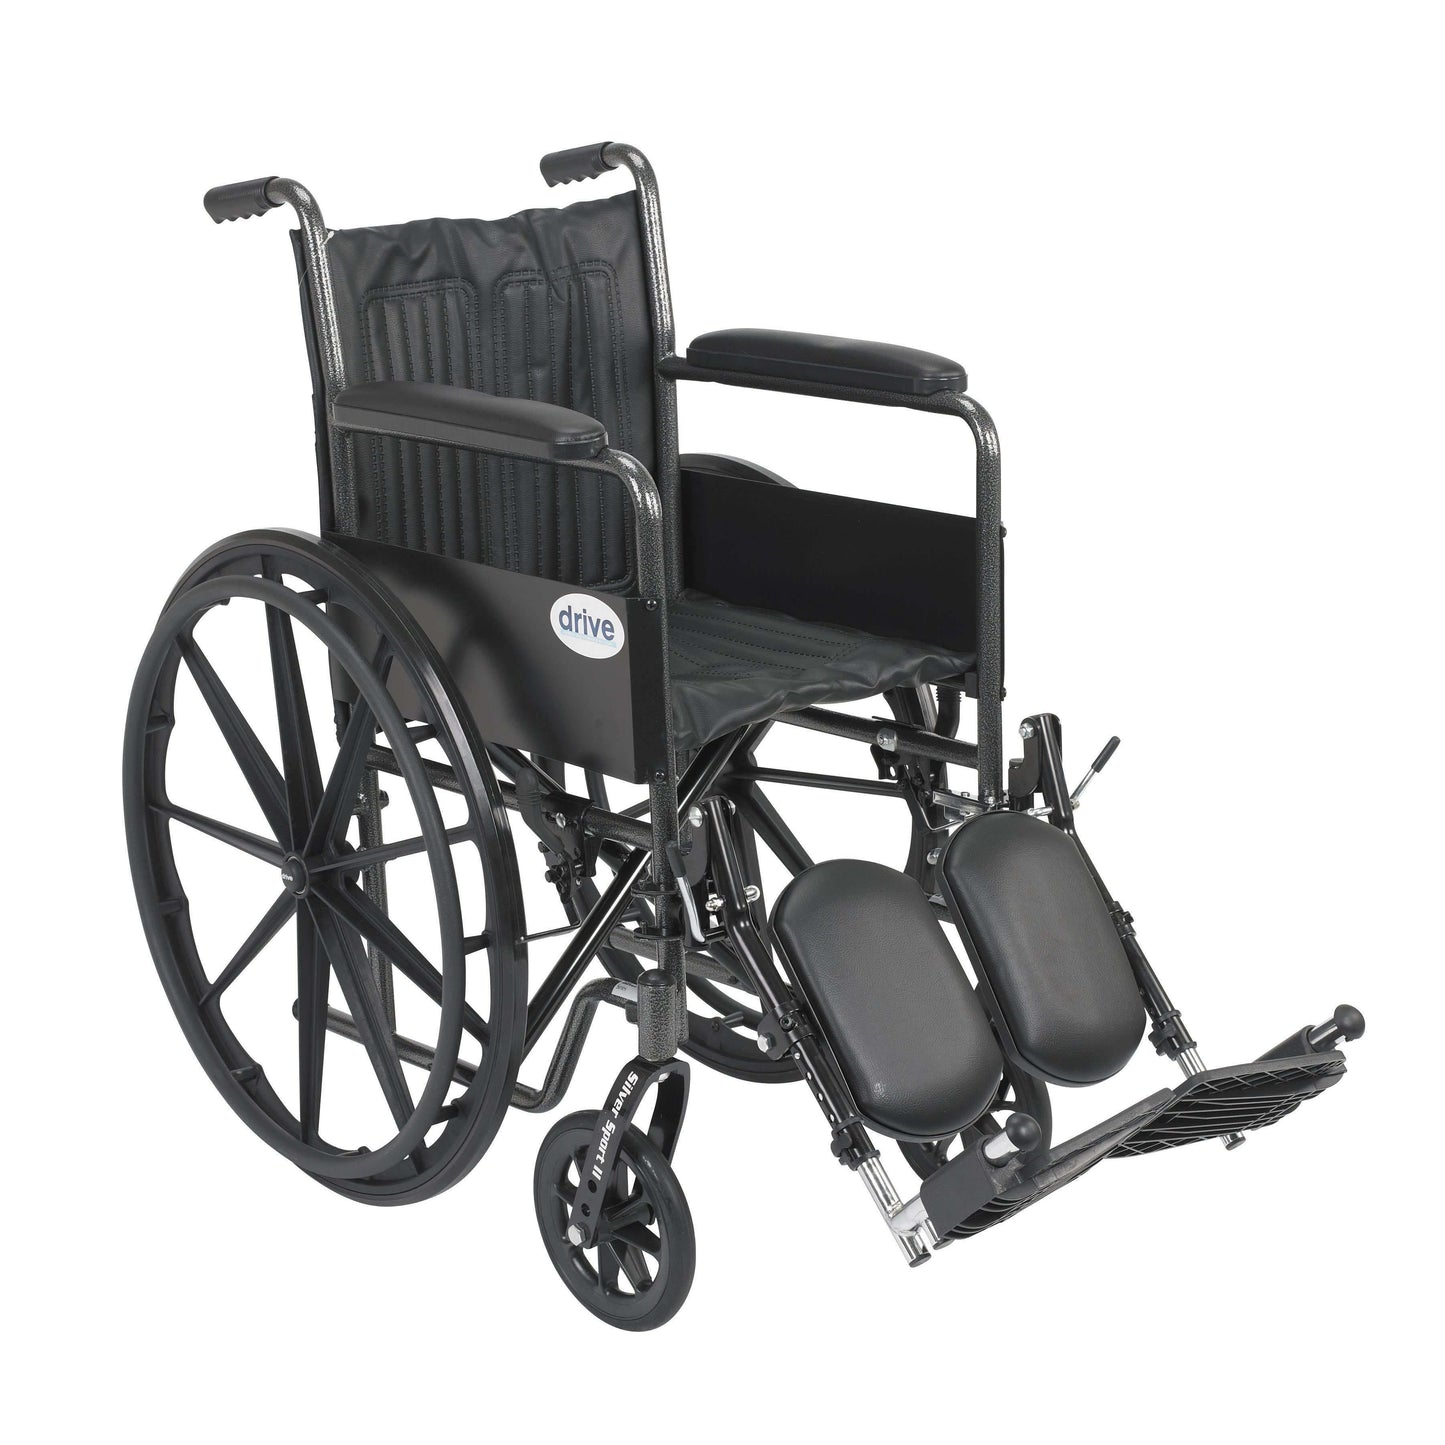 Drive ssp218fa-elr Silver Sport 2 Wheelchair, Non Removable Fixed Arms, Elevating Leg Rests, 18" Seat